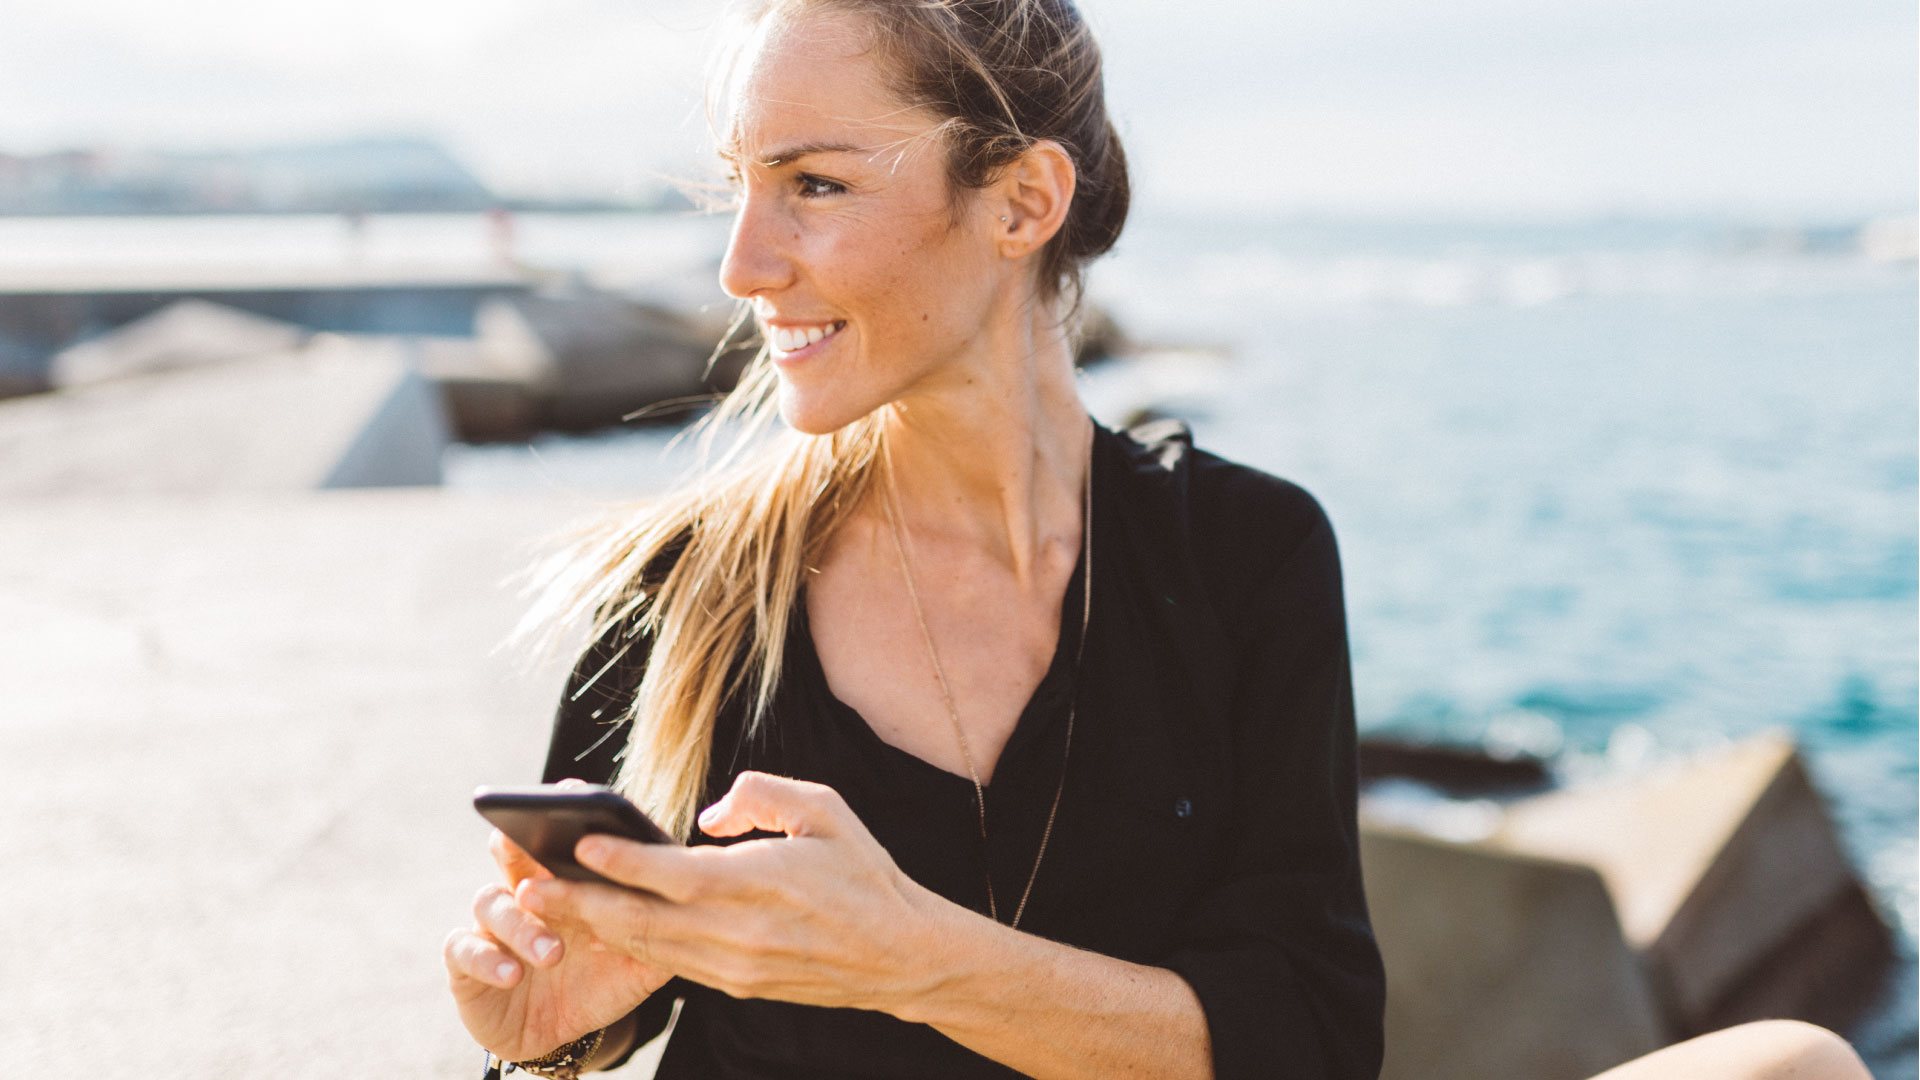 Overcoming Personalisation Paralysis webinar - Photo of a woman with long blonde hair on the beach, wearing a black top and holding a smartphone